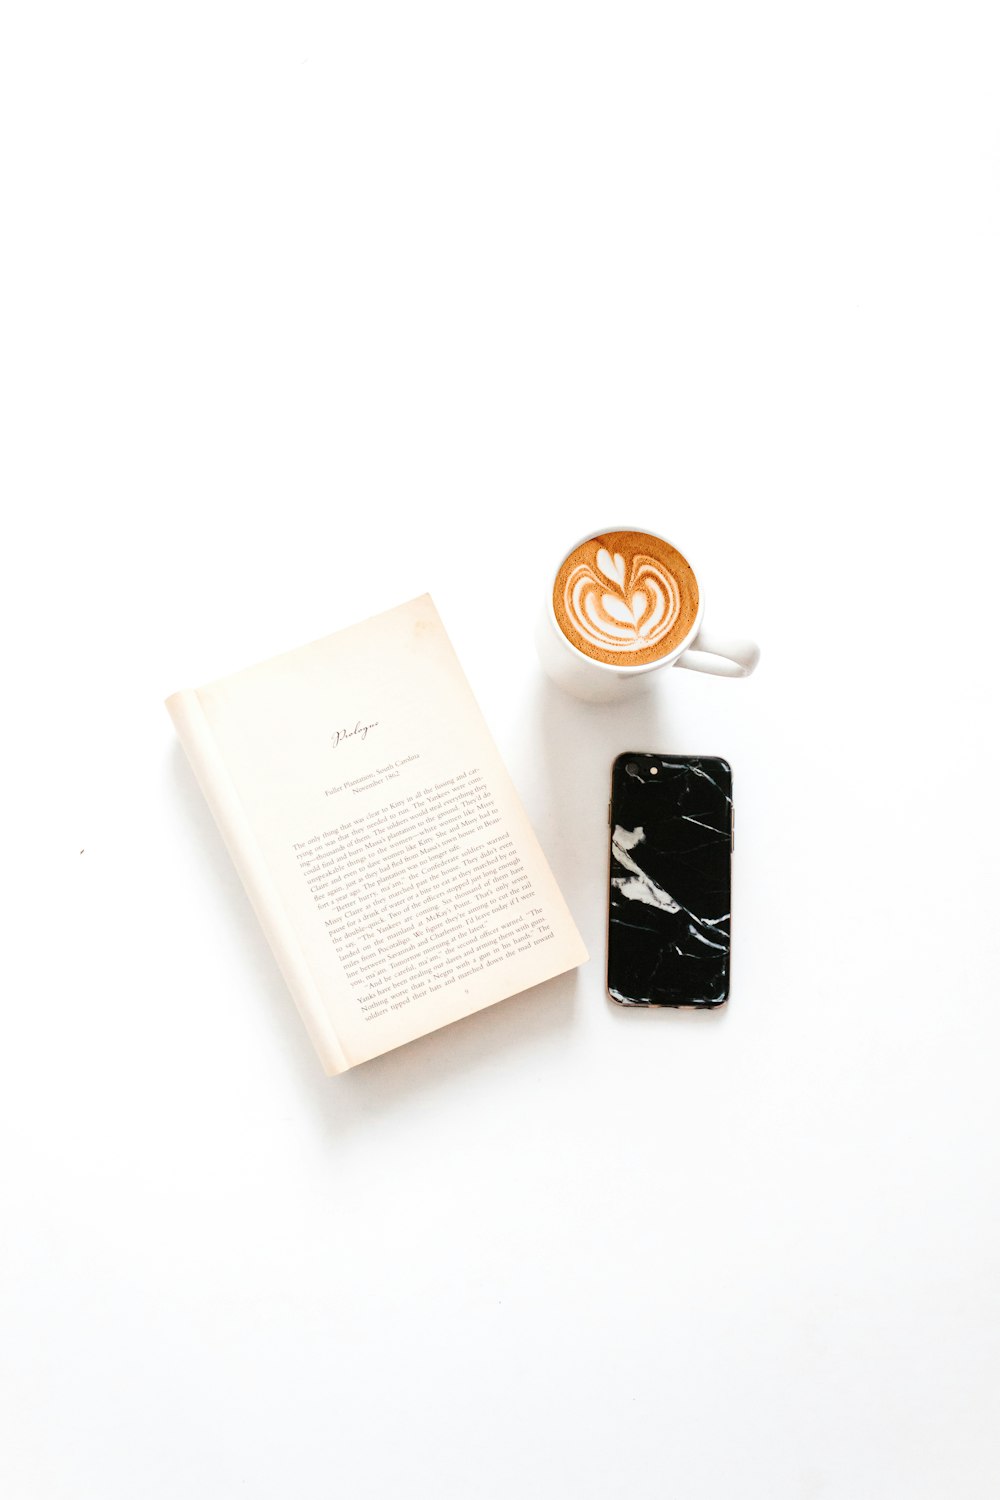 book, coffee and Android smartphone